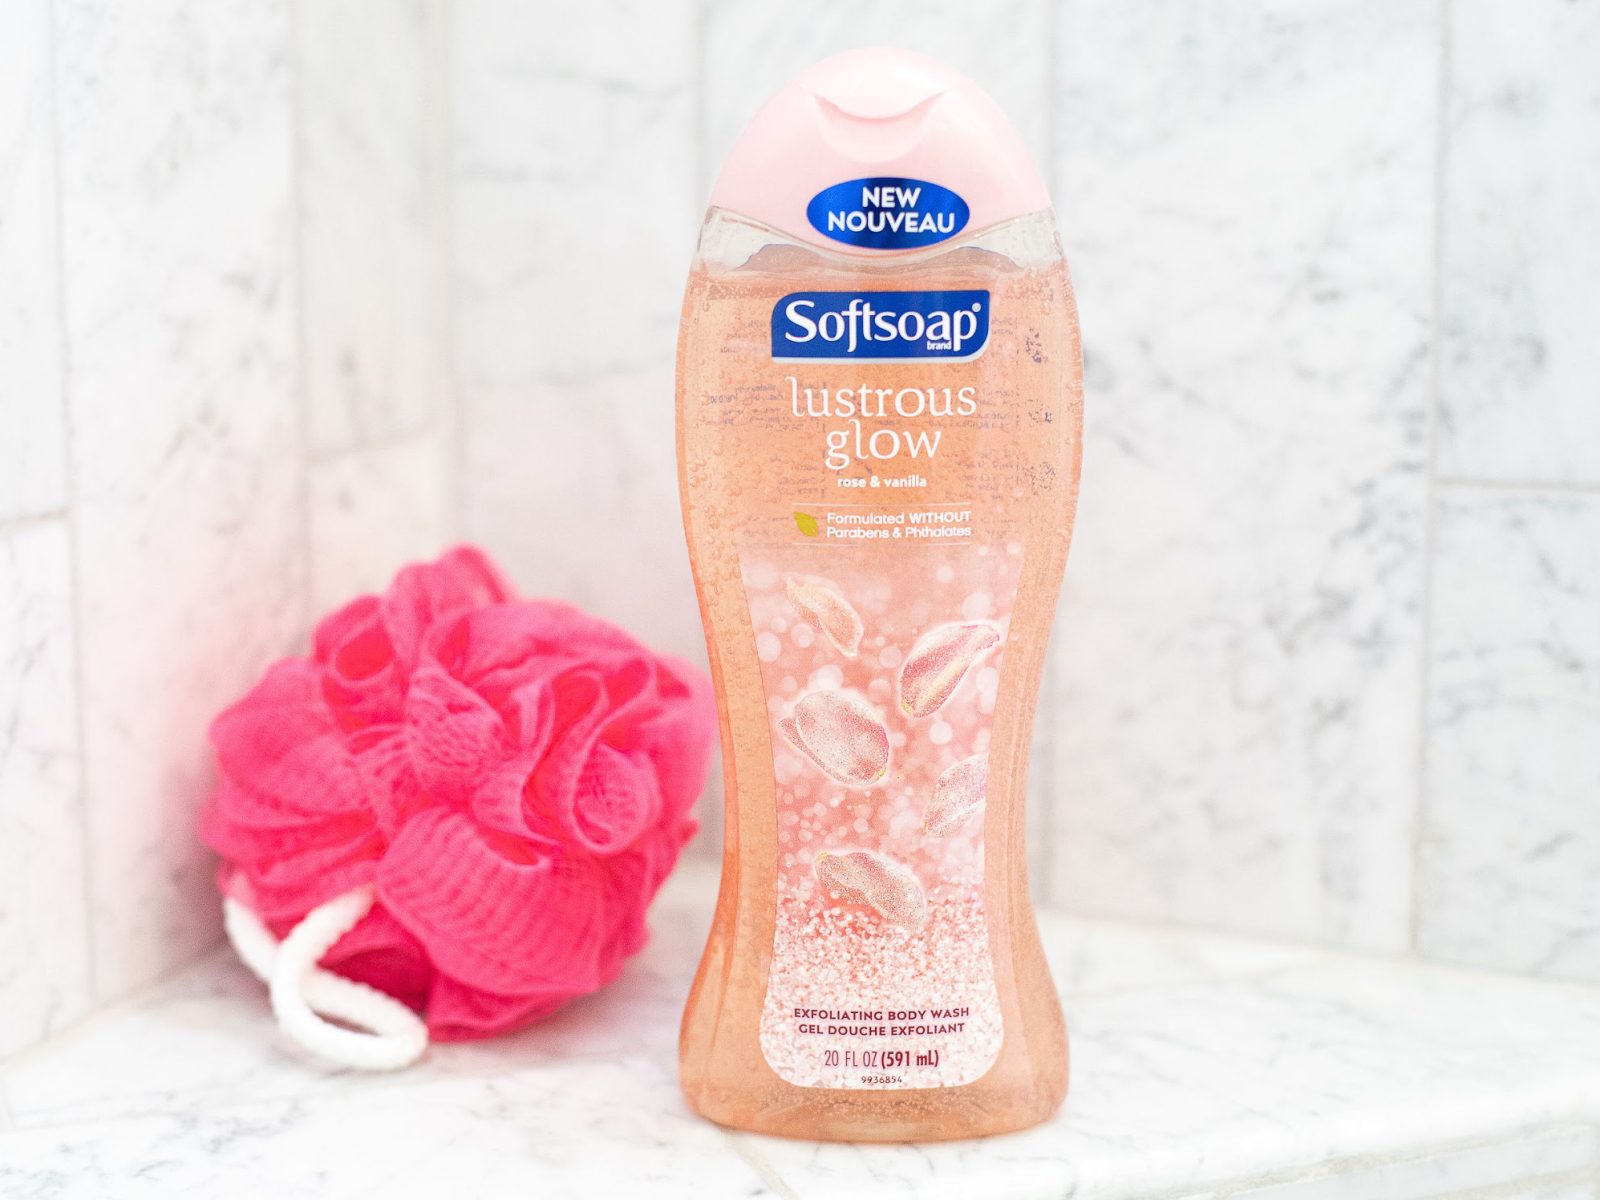 Softsoap Body Wash As Low As $1.05 At Publix – Deal Ends Soon